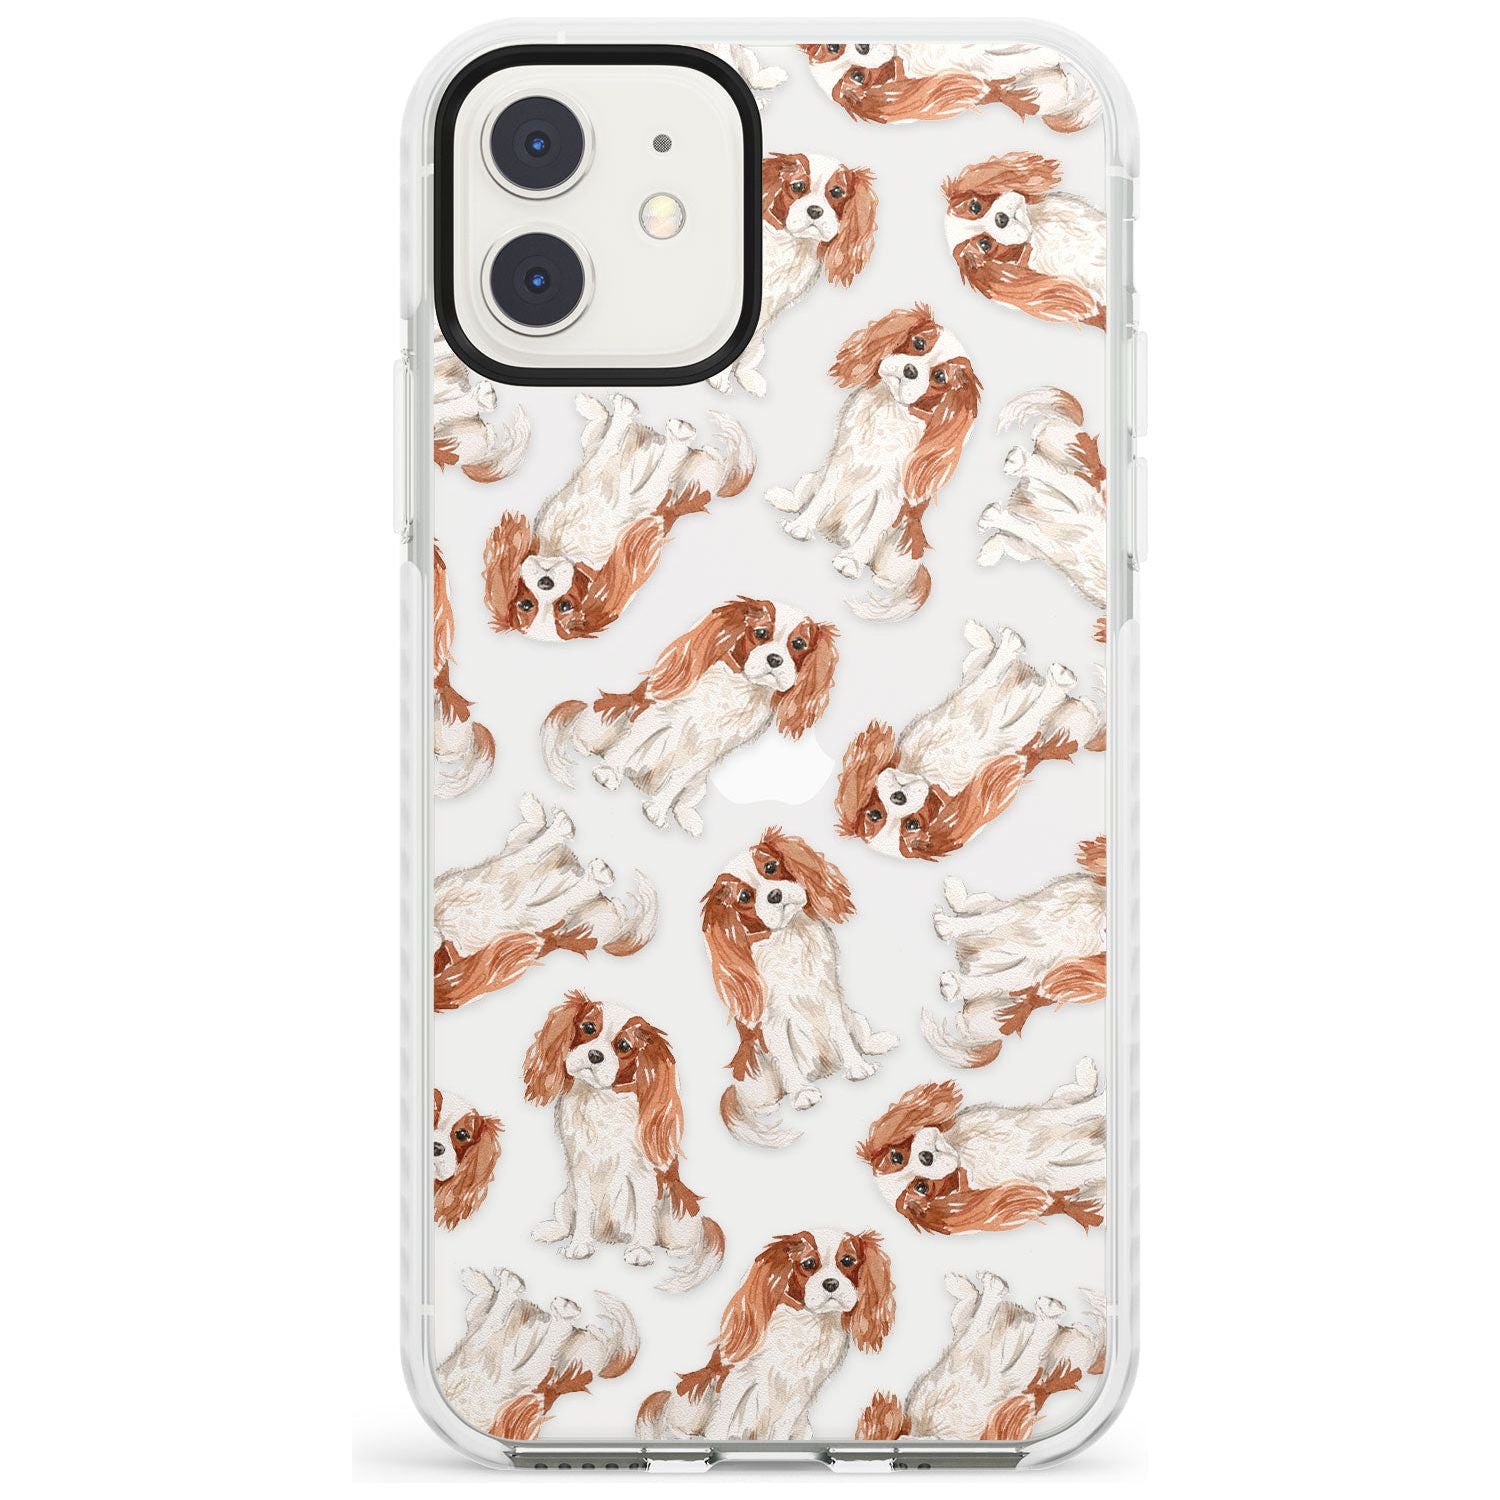 Cavalier King Charles Spaniel Dog Pattern Impact Phone Case for iPhone 11